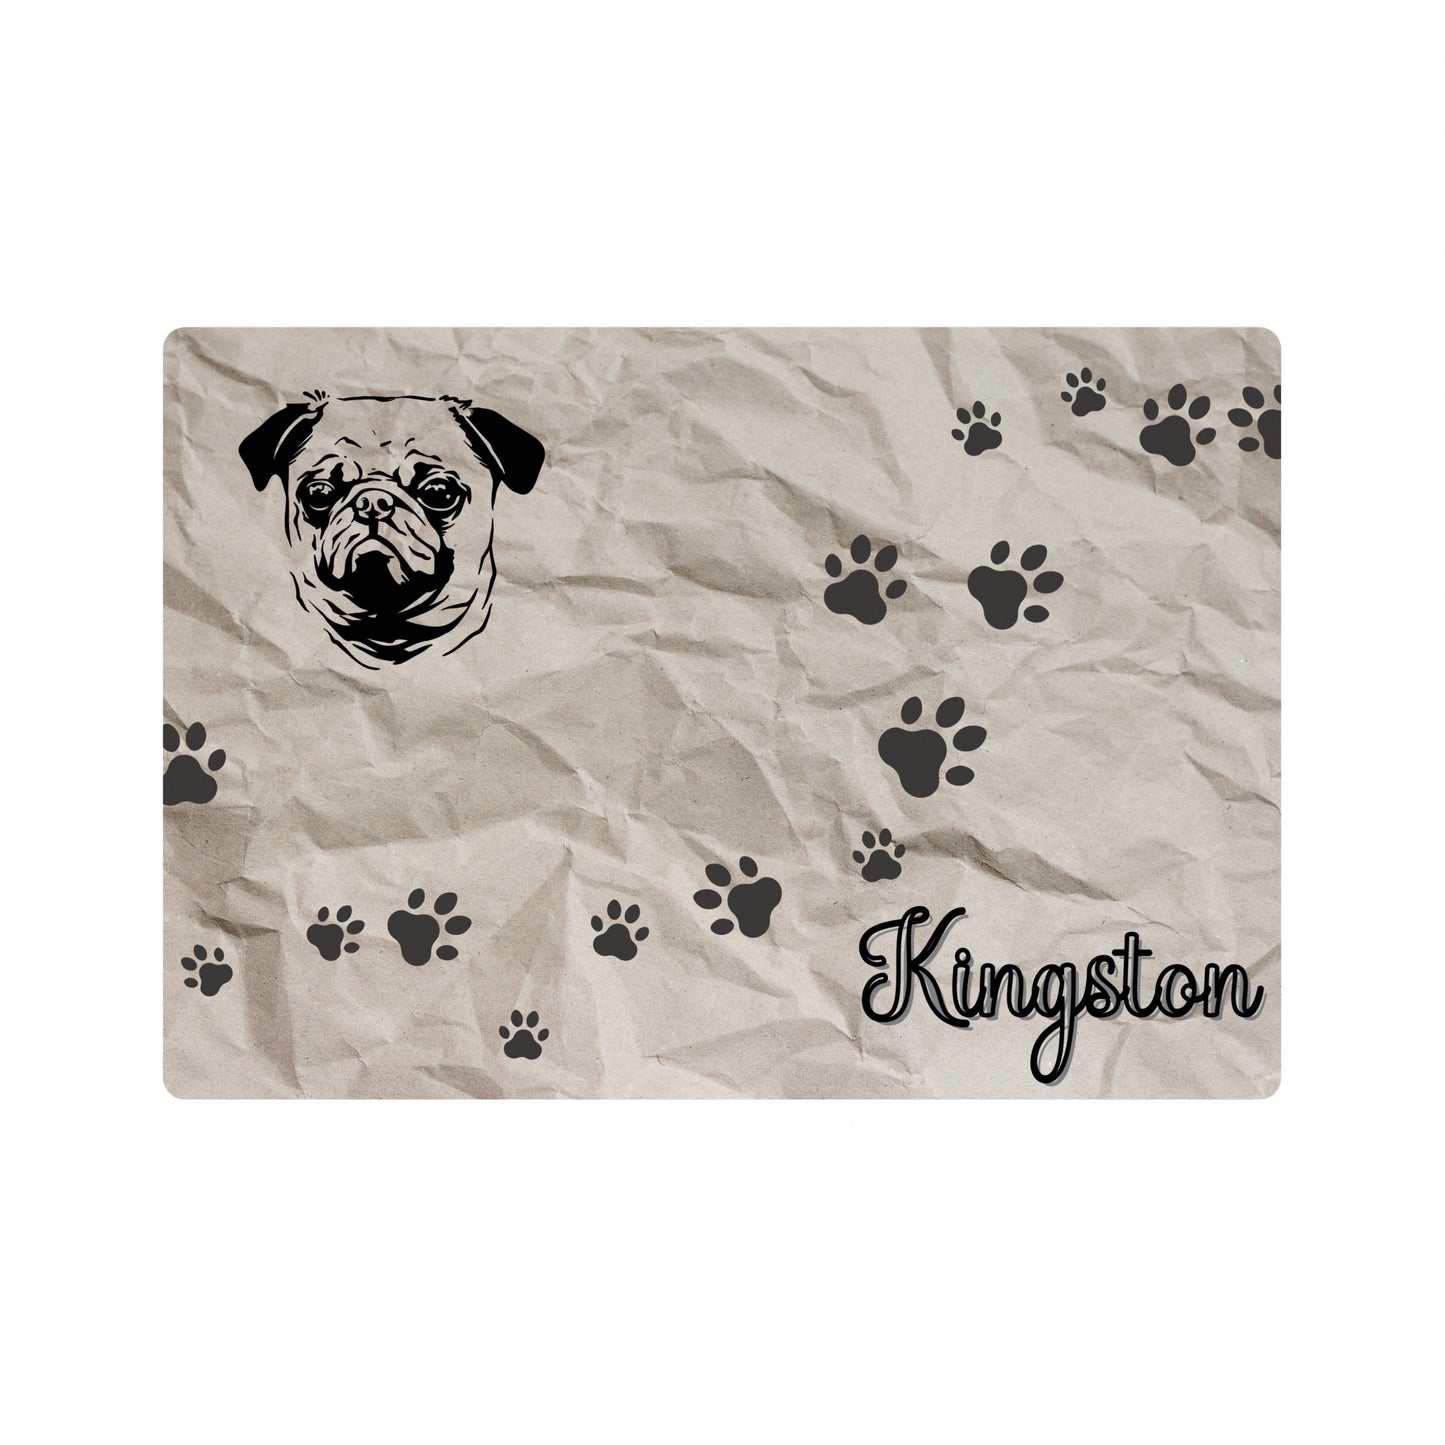 Personalized Pet Placement - Pug